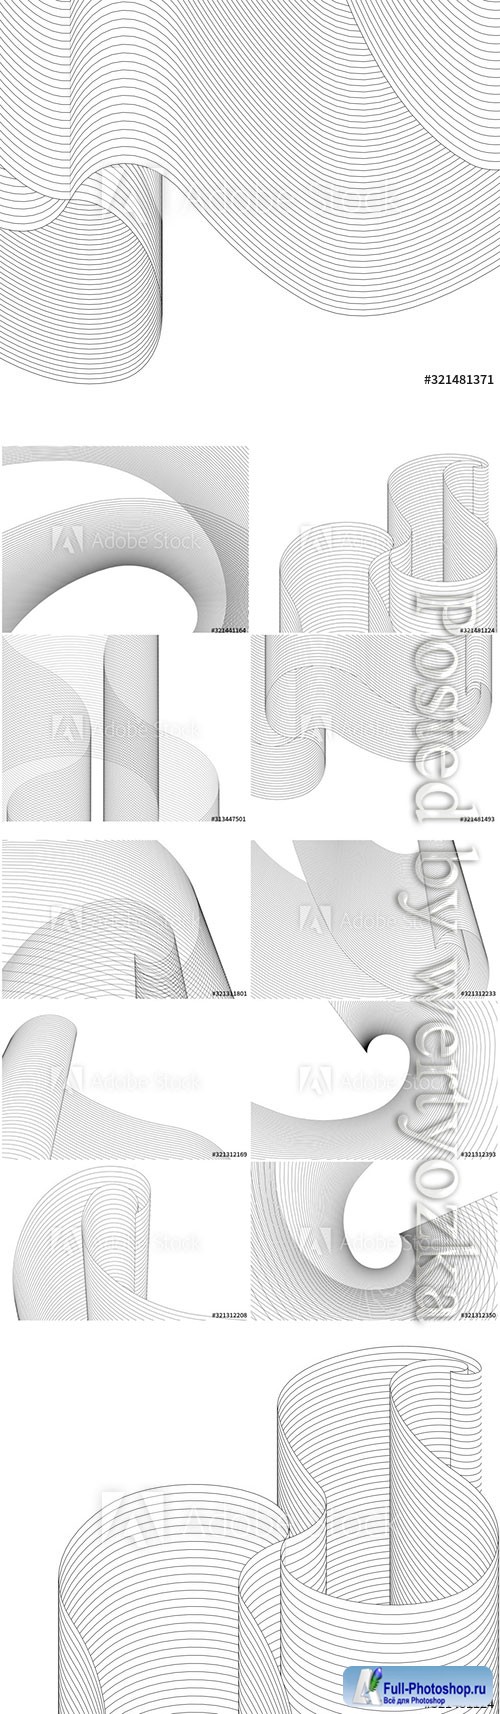 Abstract linear shapes 3d vector illustration